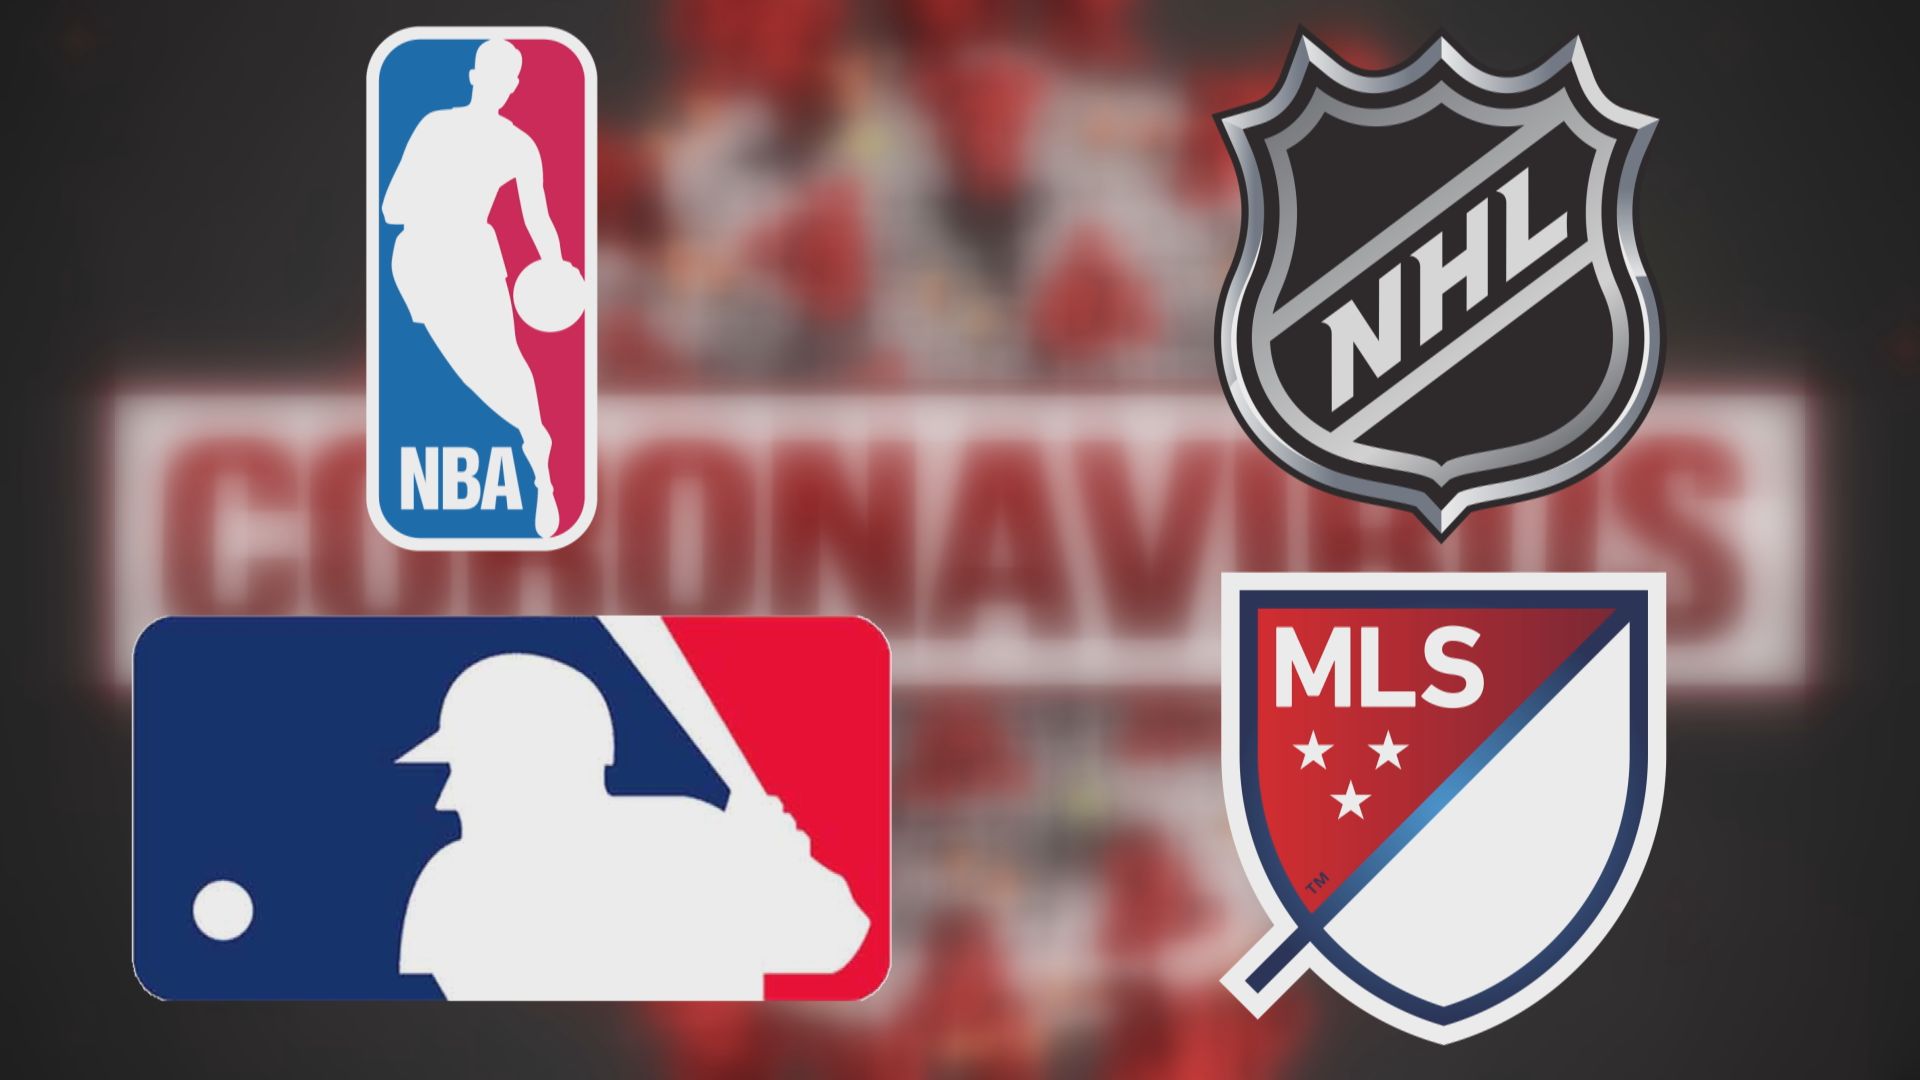 NHL, MLB, NBA and MLS to limit locker room access to essential